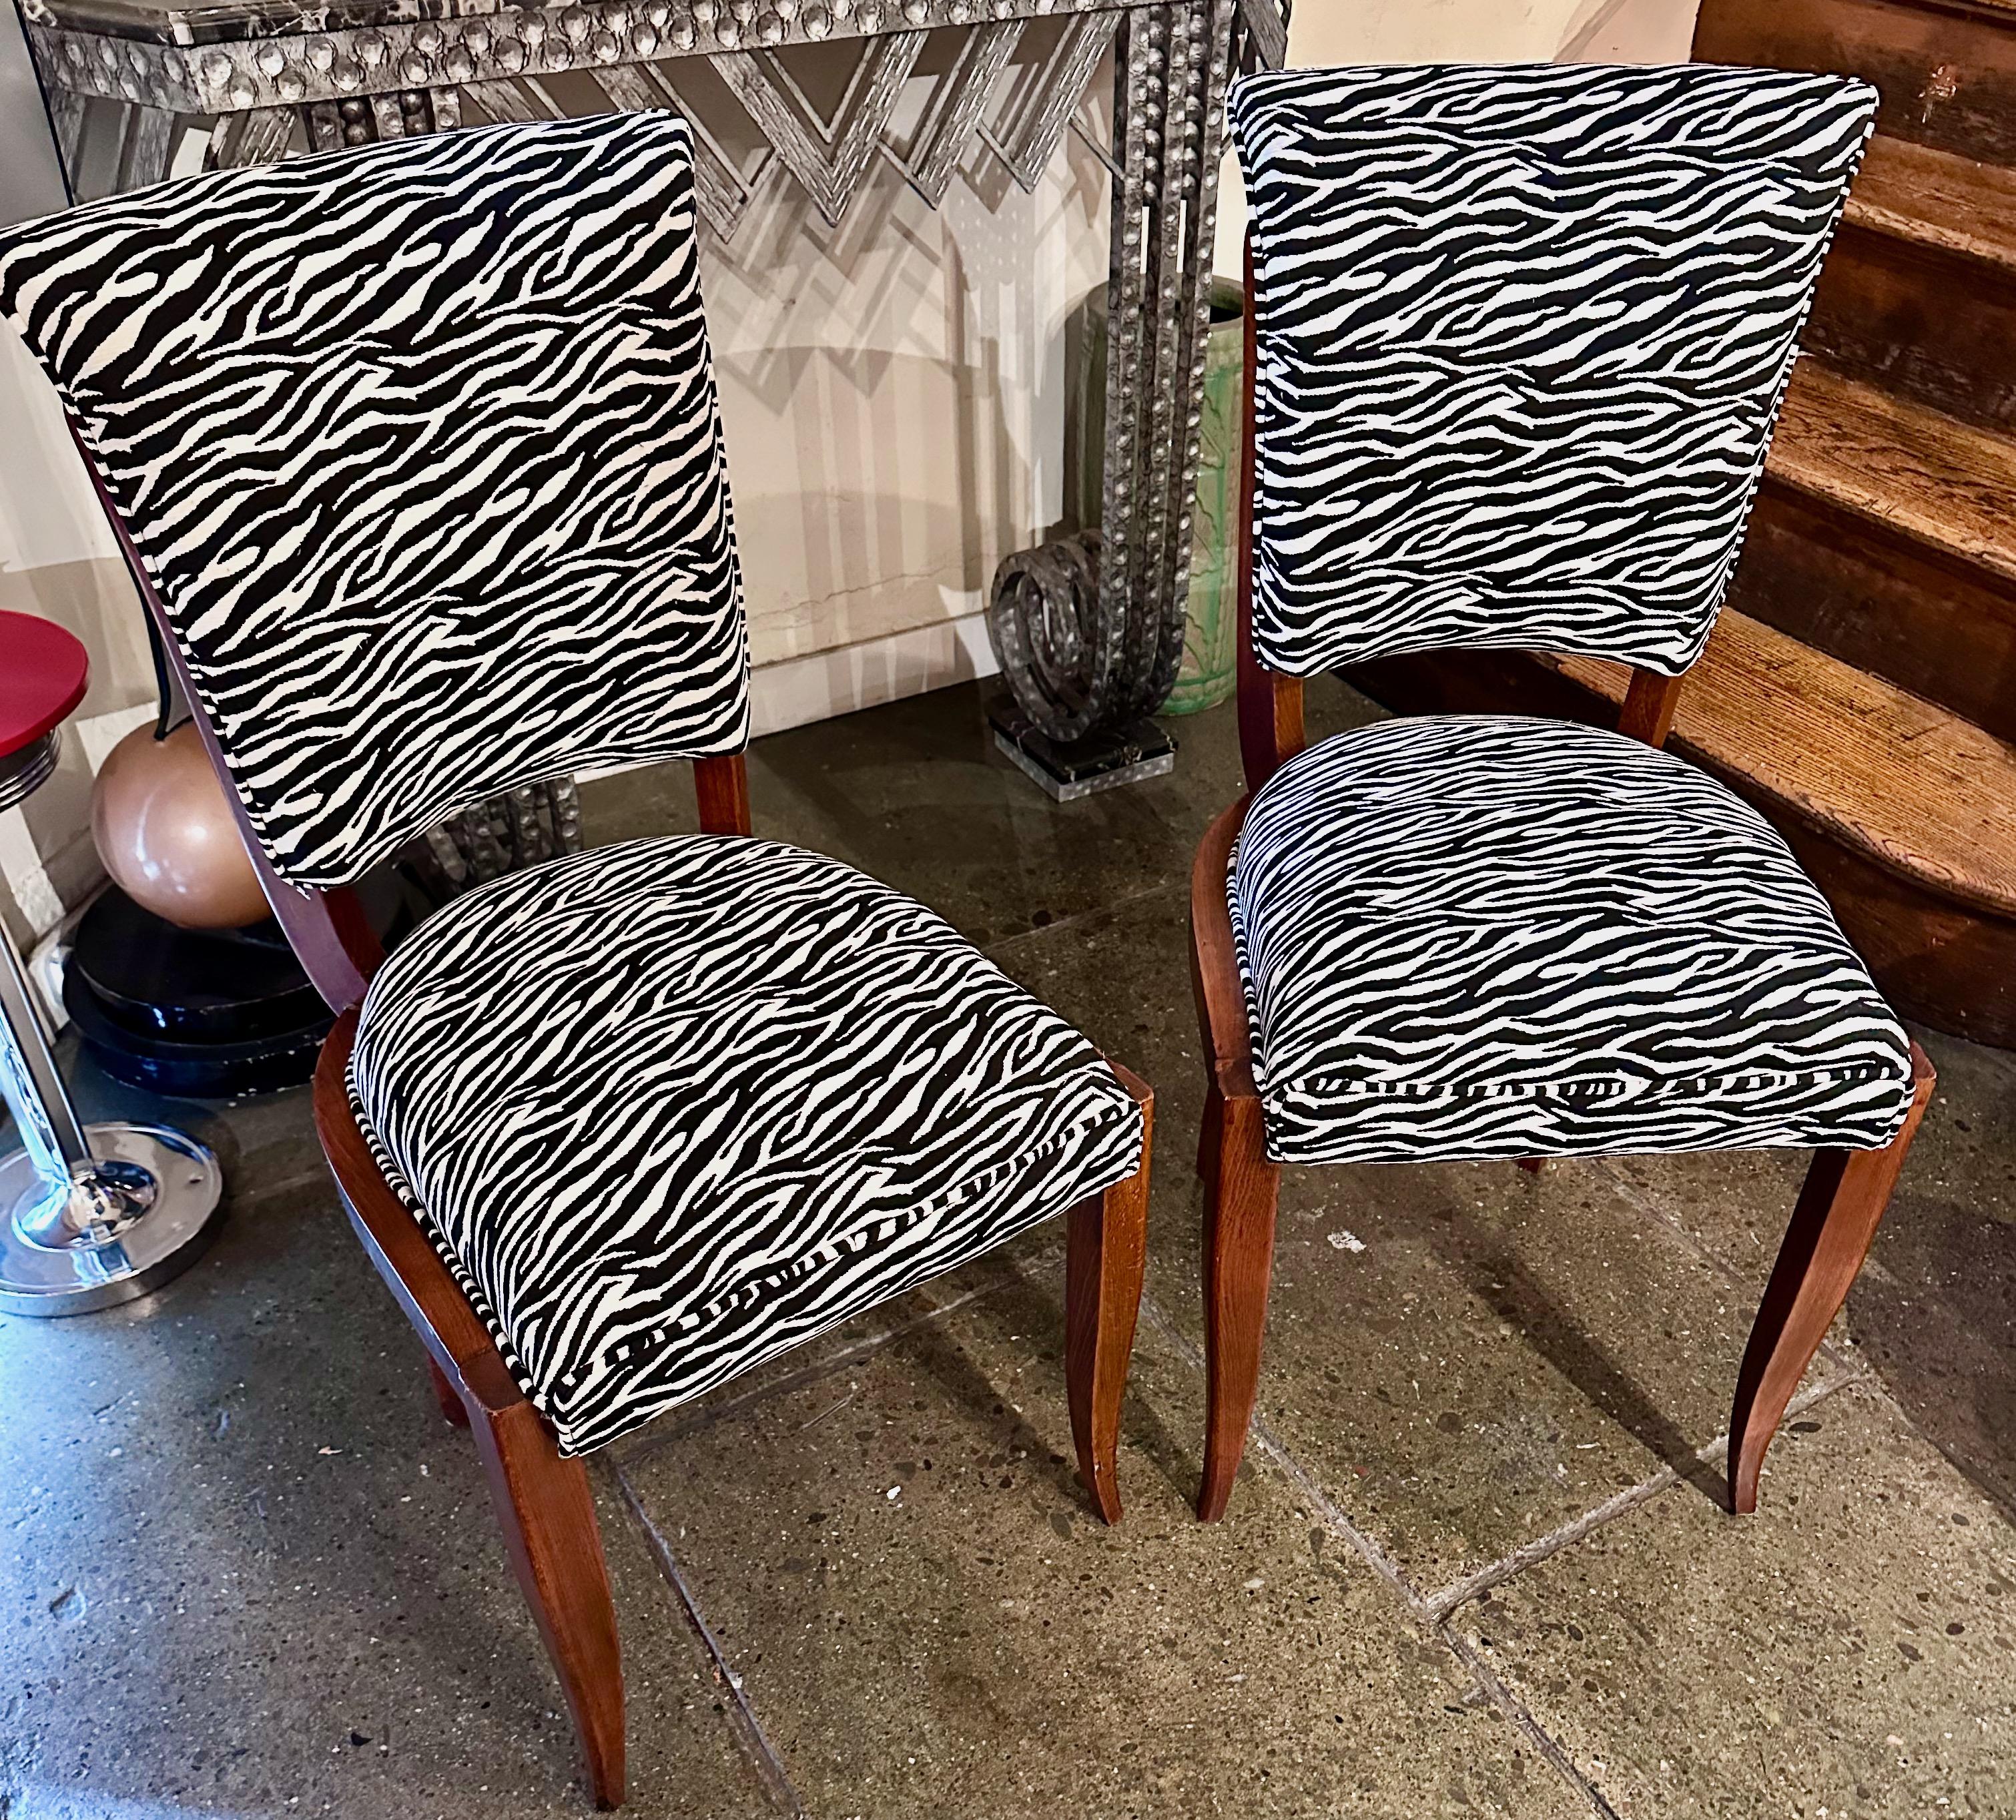 Art Deco Zebra Style Matching Pair of Side Chairs are a stunning set of two chairs from the Art Deco period. These chairs feature exposed Mahagonny wood frames that have been renewed, bringing out their original beauty.

The chairs are perfect for